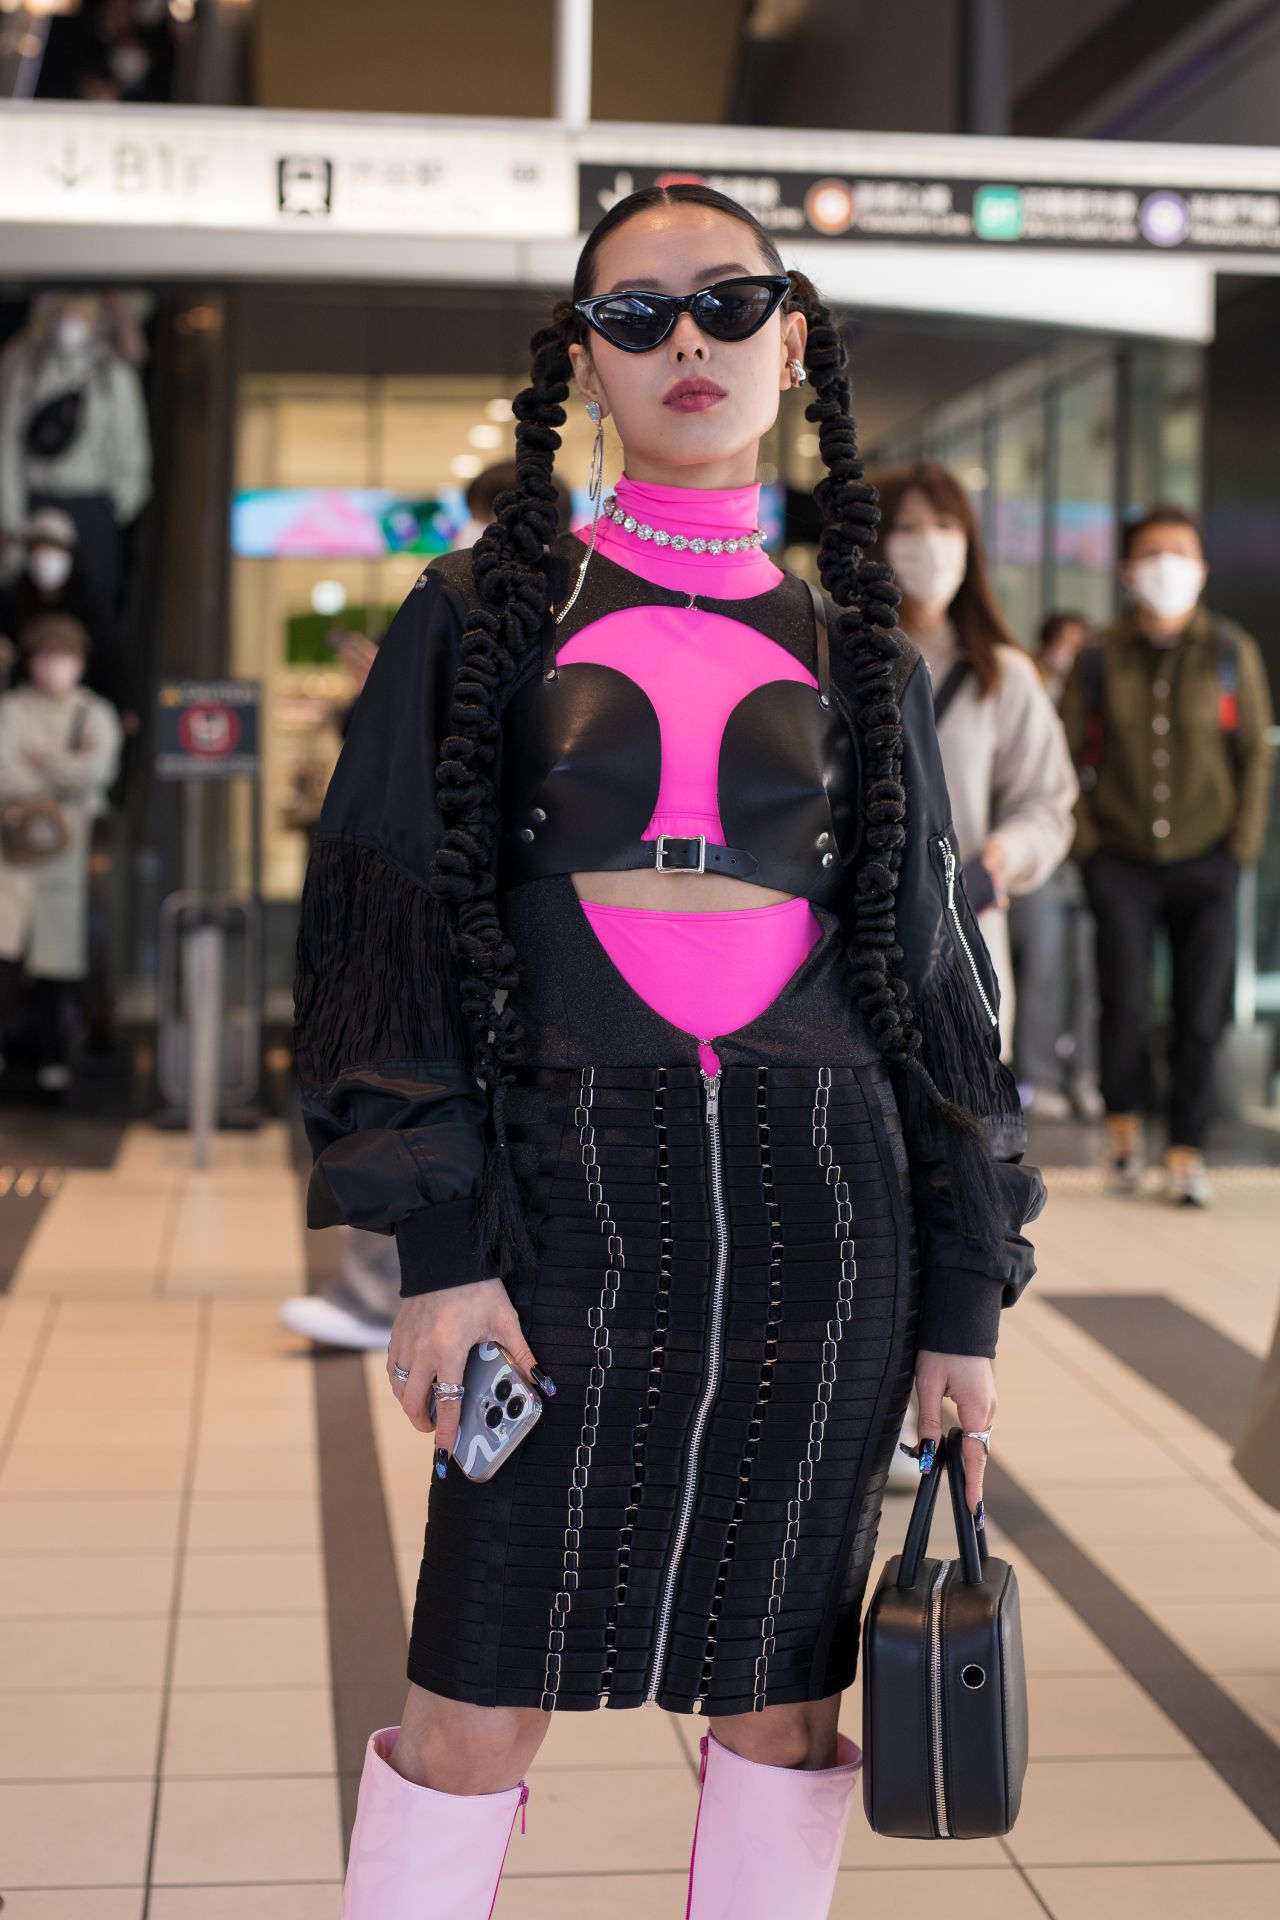 An eye-catching black and hot pink ensemble worn with cat-eye sunglasses, silver jewelry, and knee-high boots. 